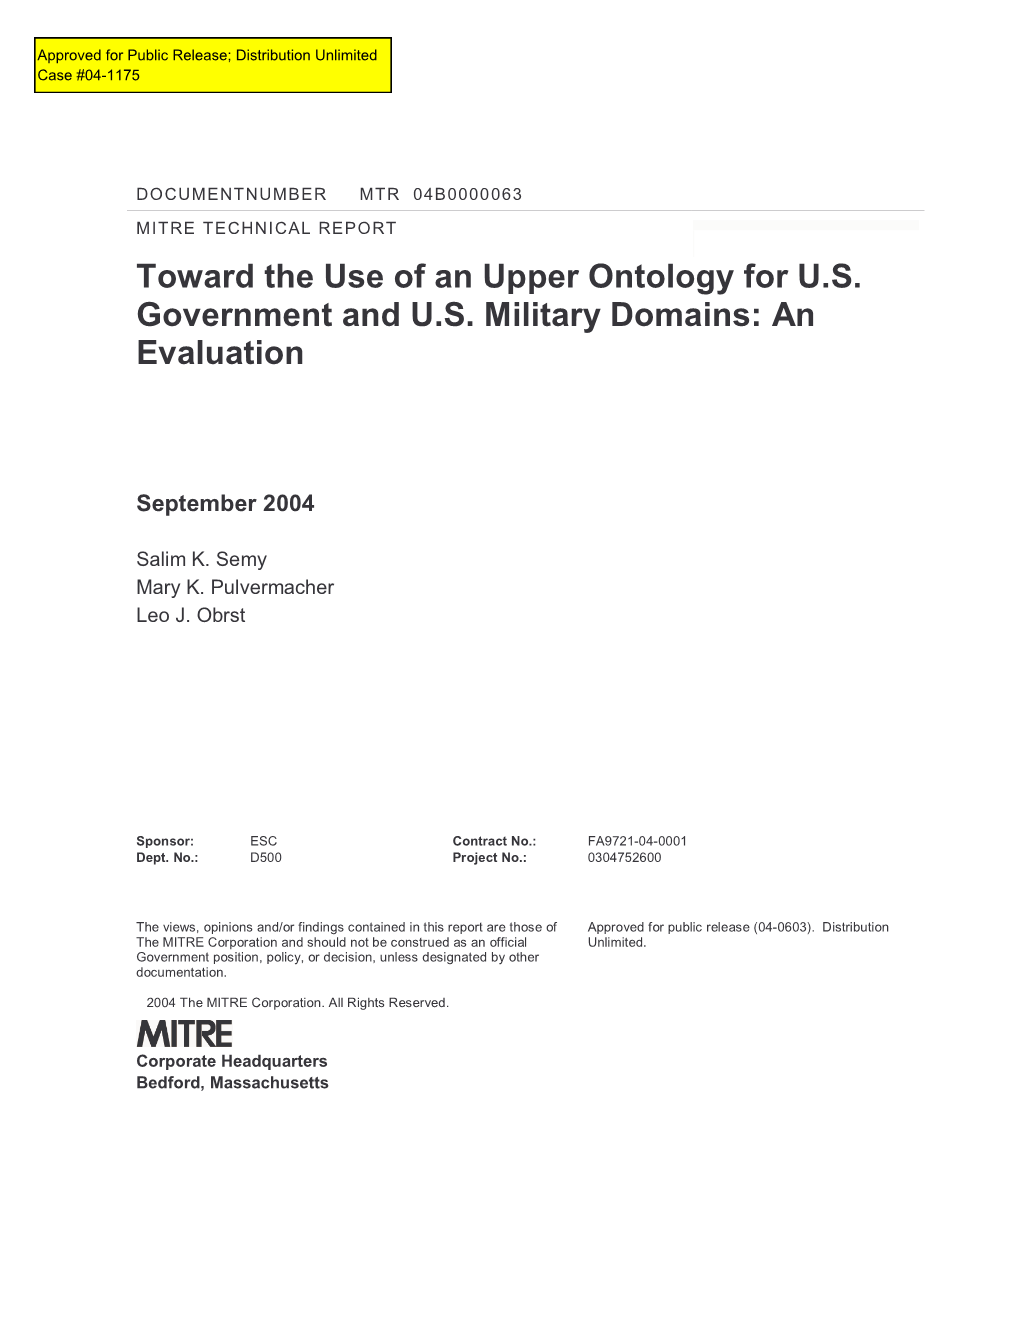 Toward the Use of an Upper Ontology for US Government and US Military